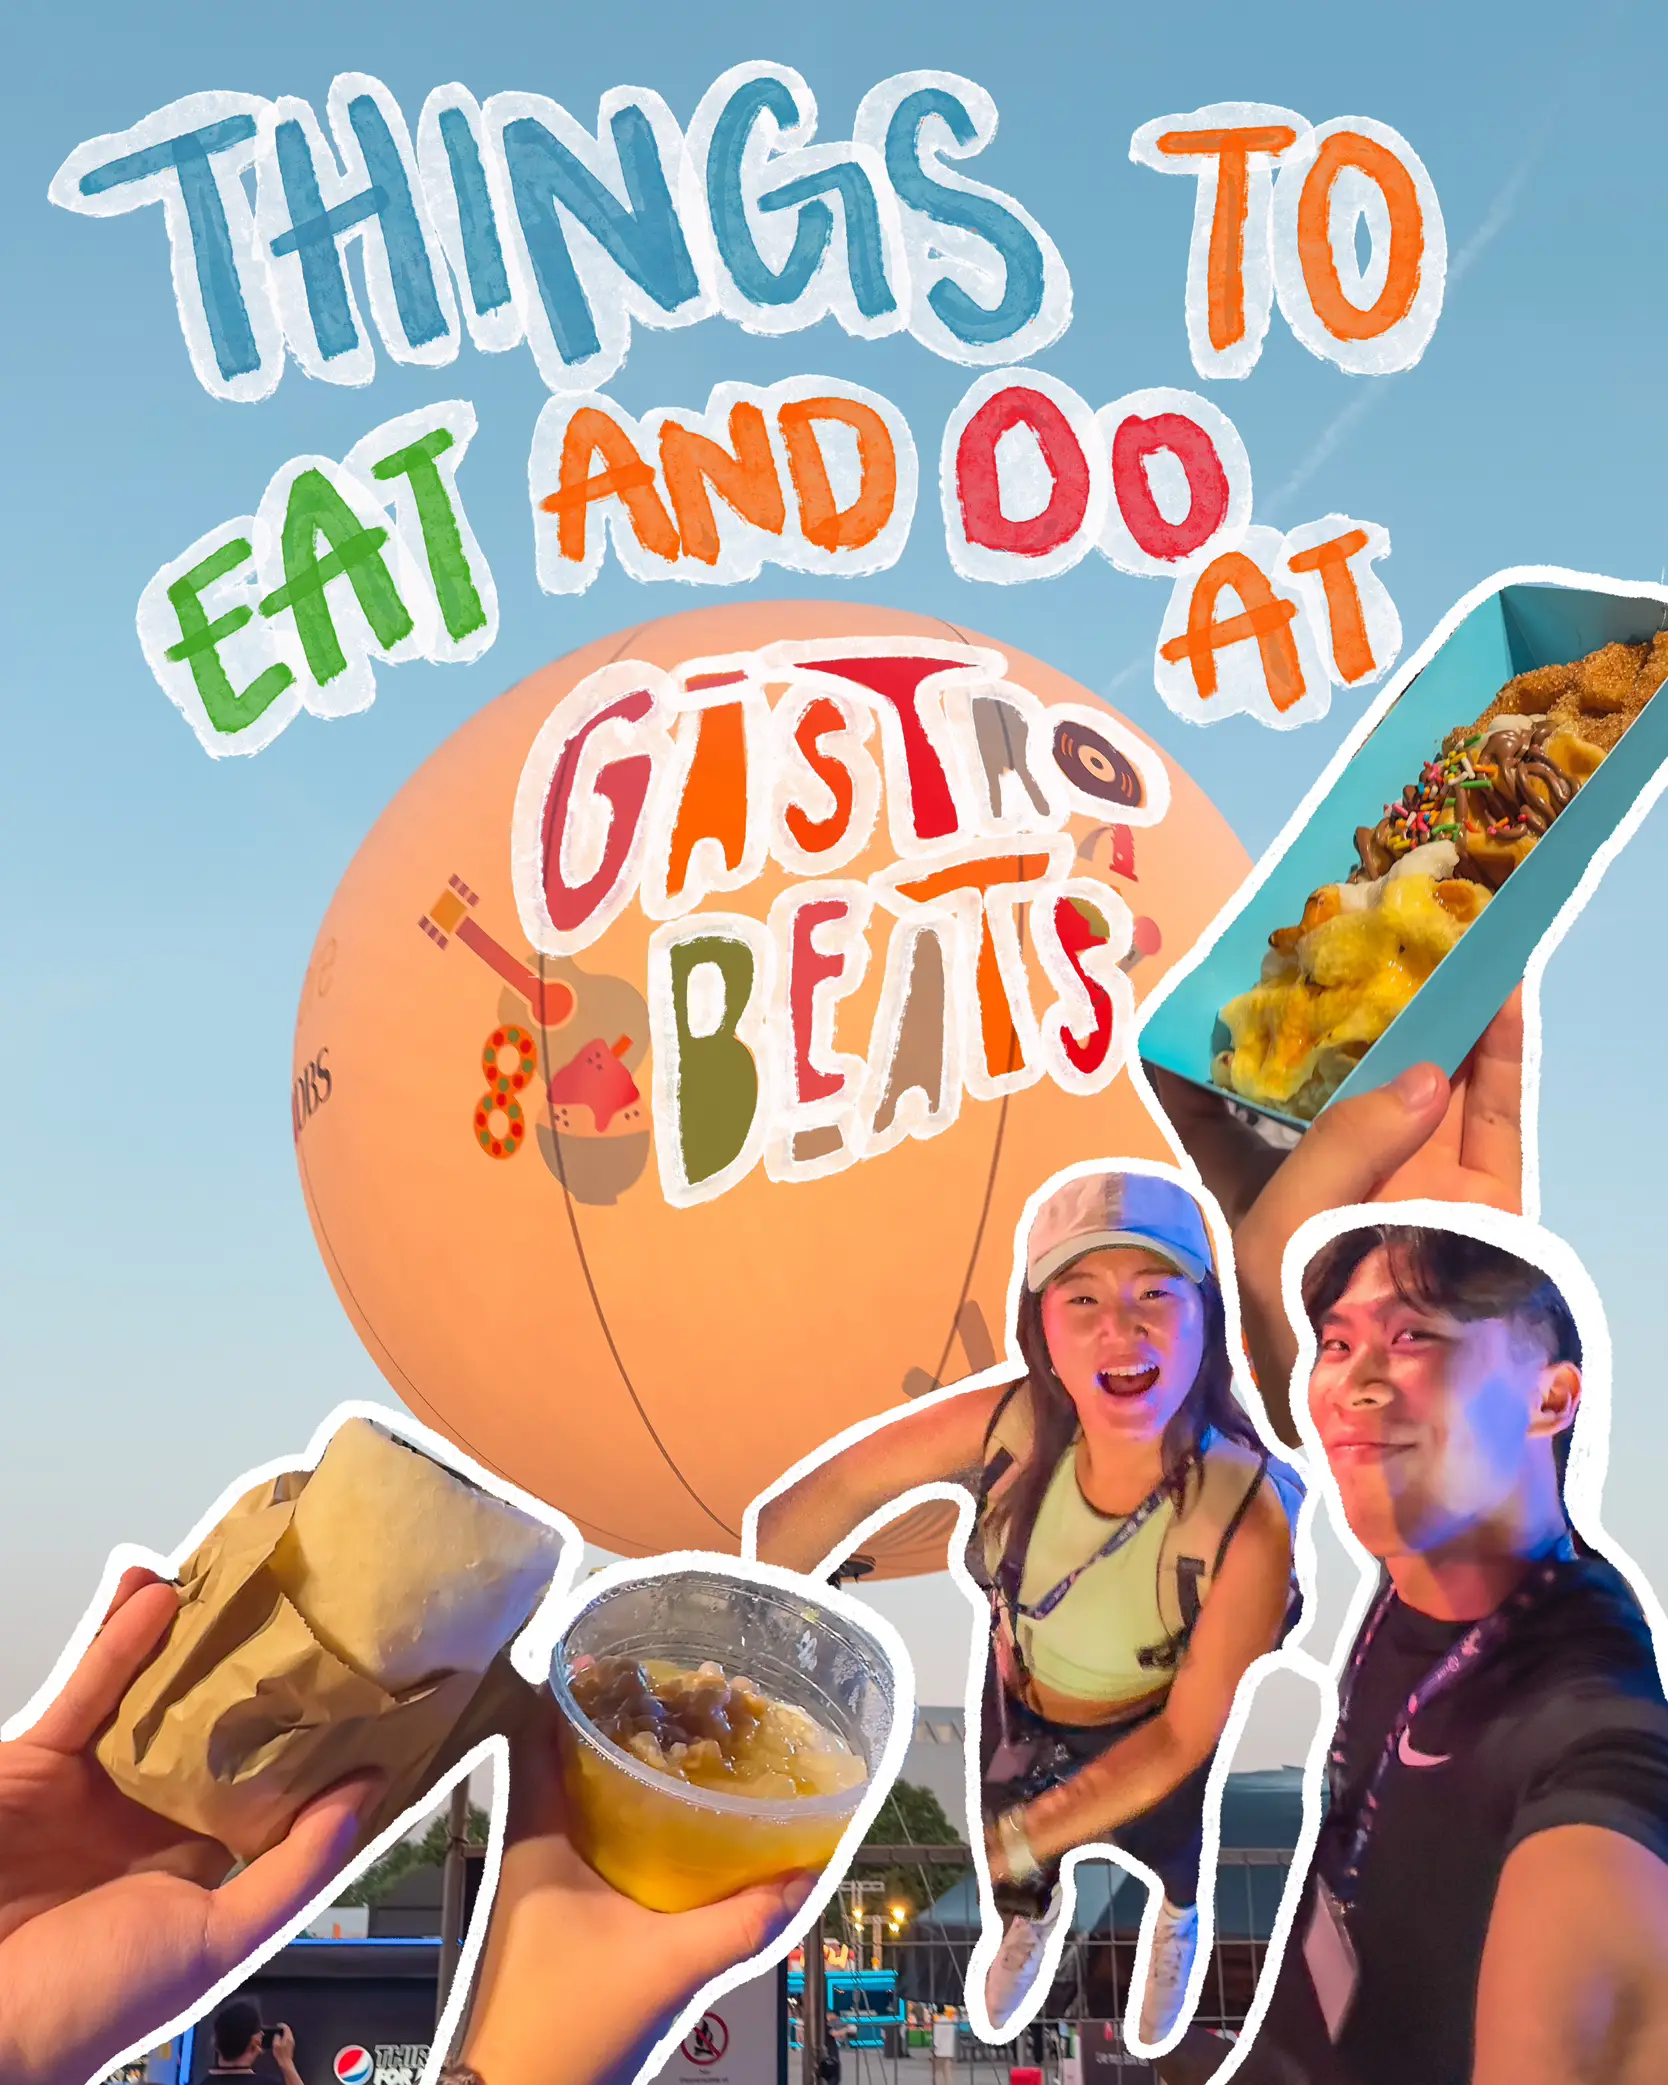 FREE ENTRY to Gastrobeats (Things to eat and do)🍖🎉's images(0)